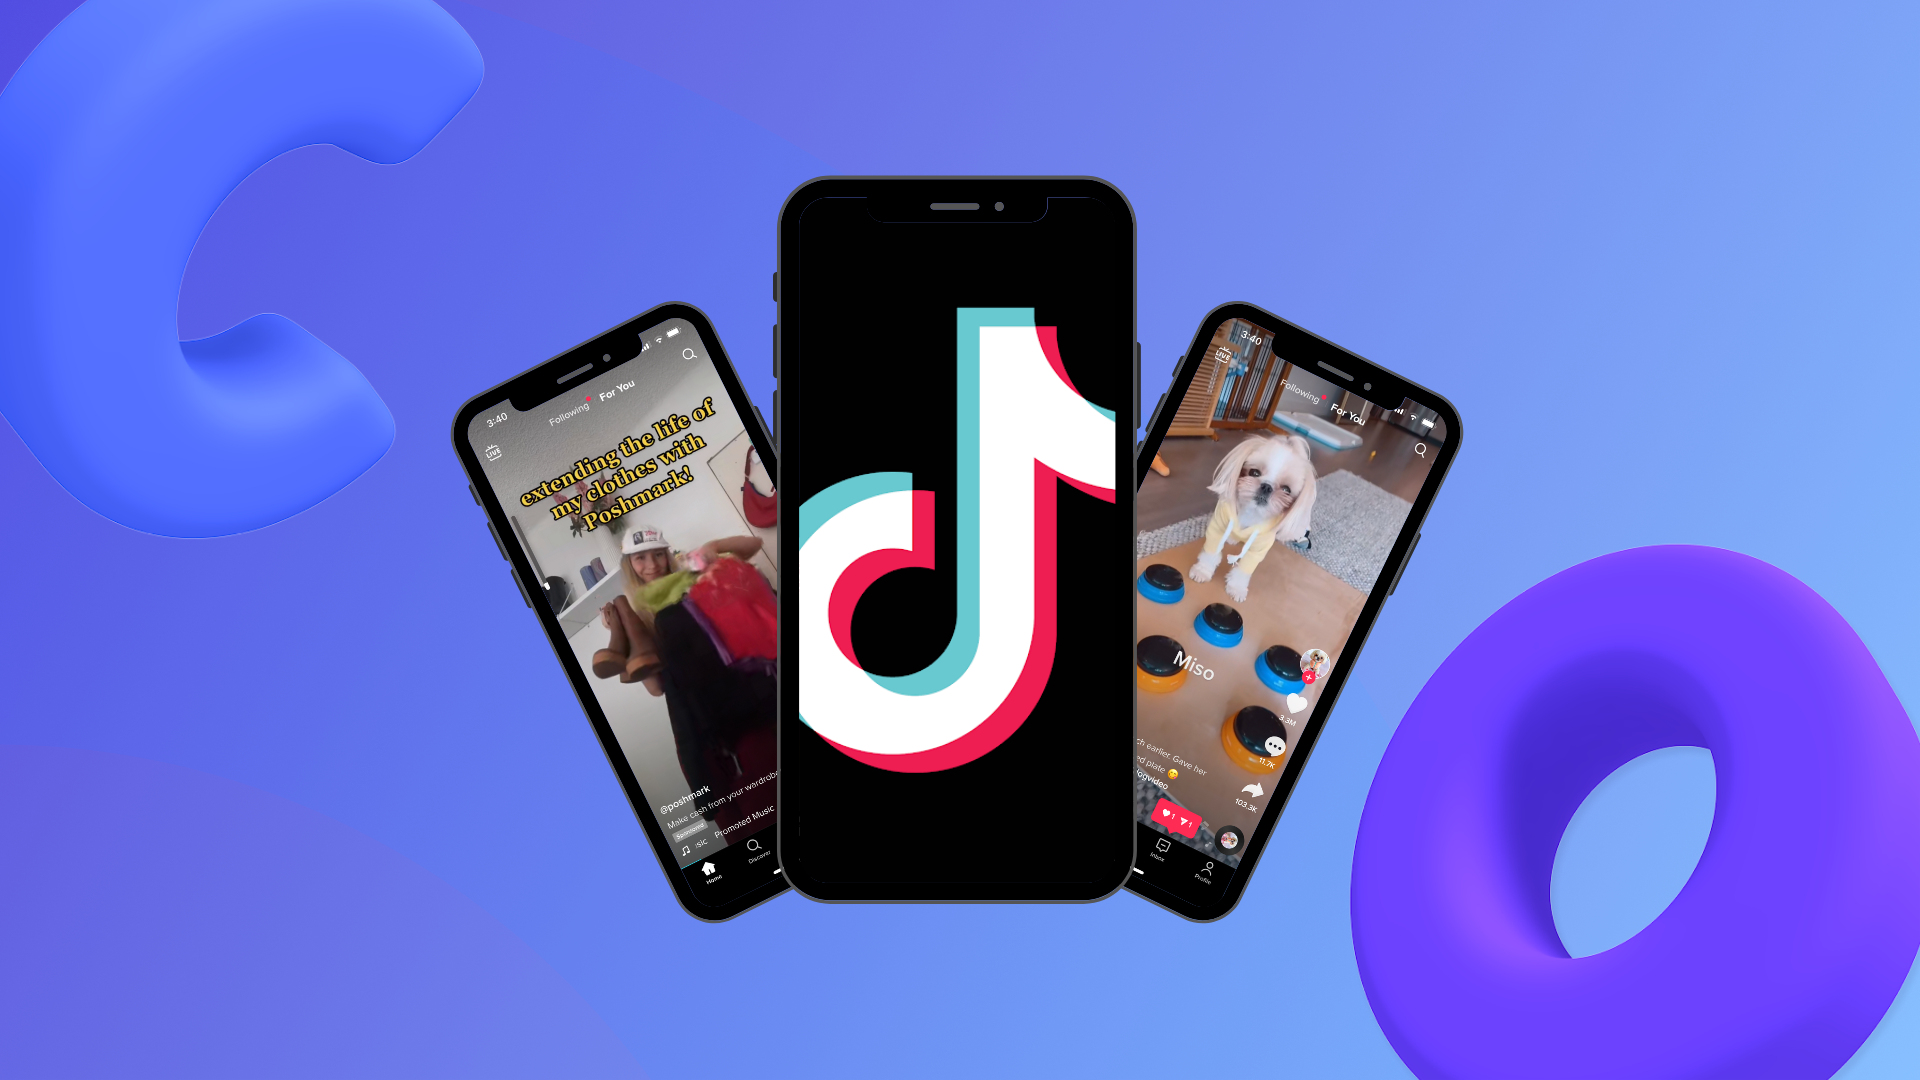 How to do the voice changer on TikTok?